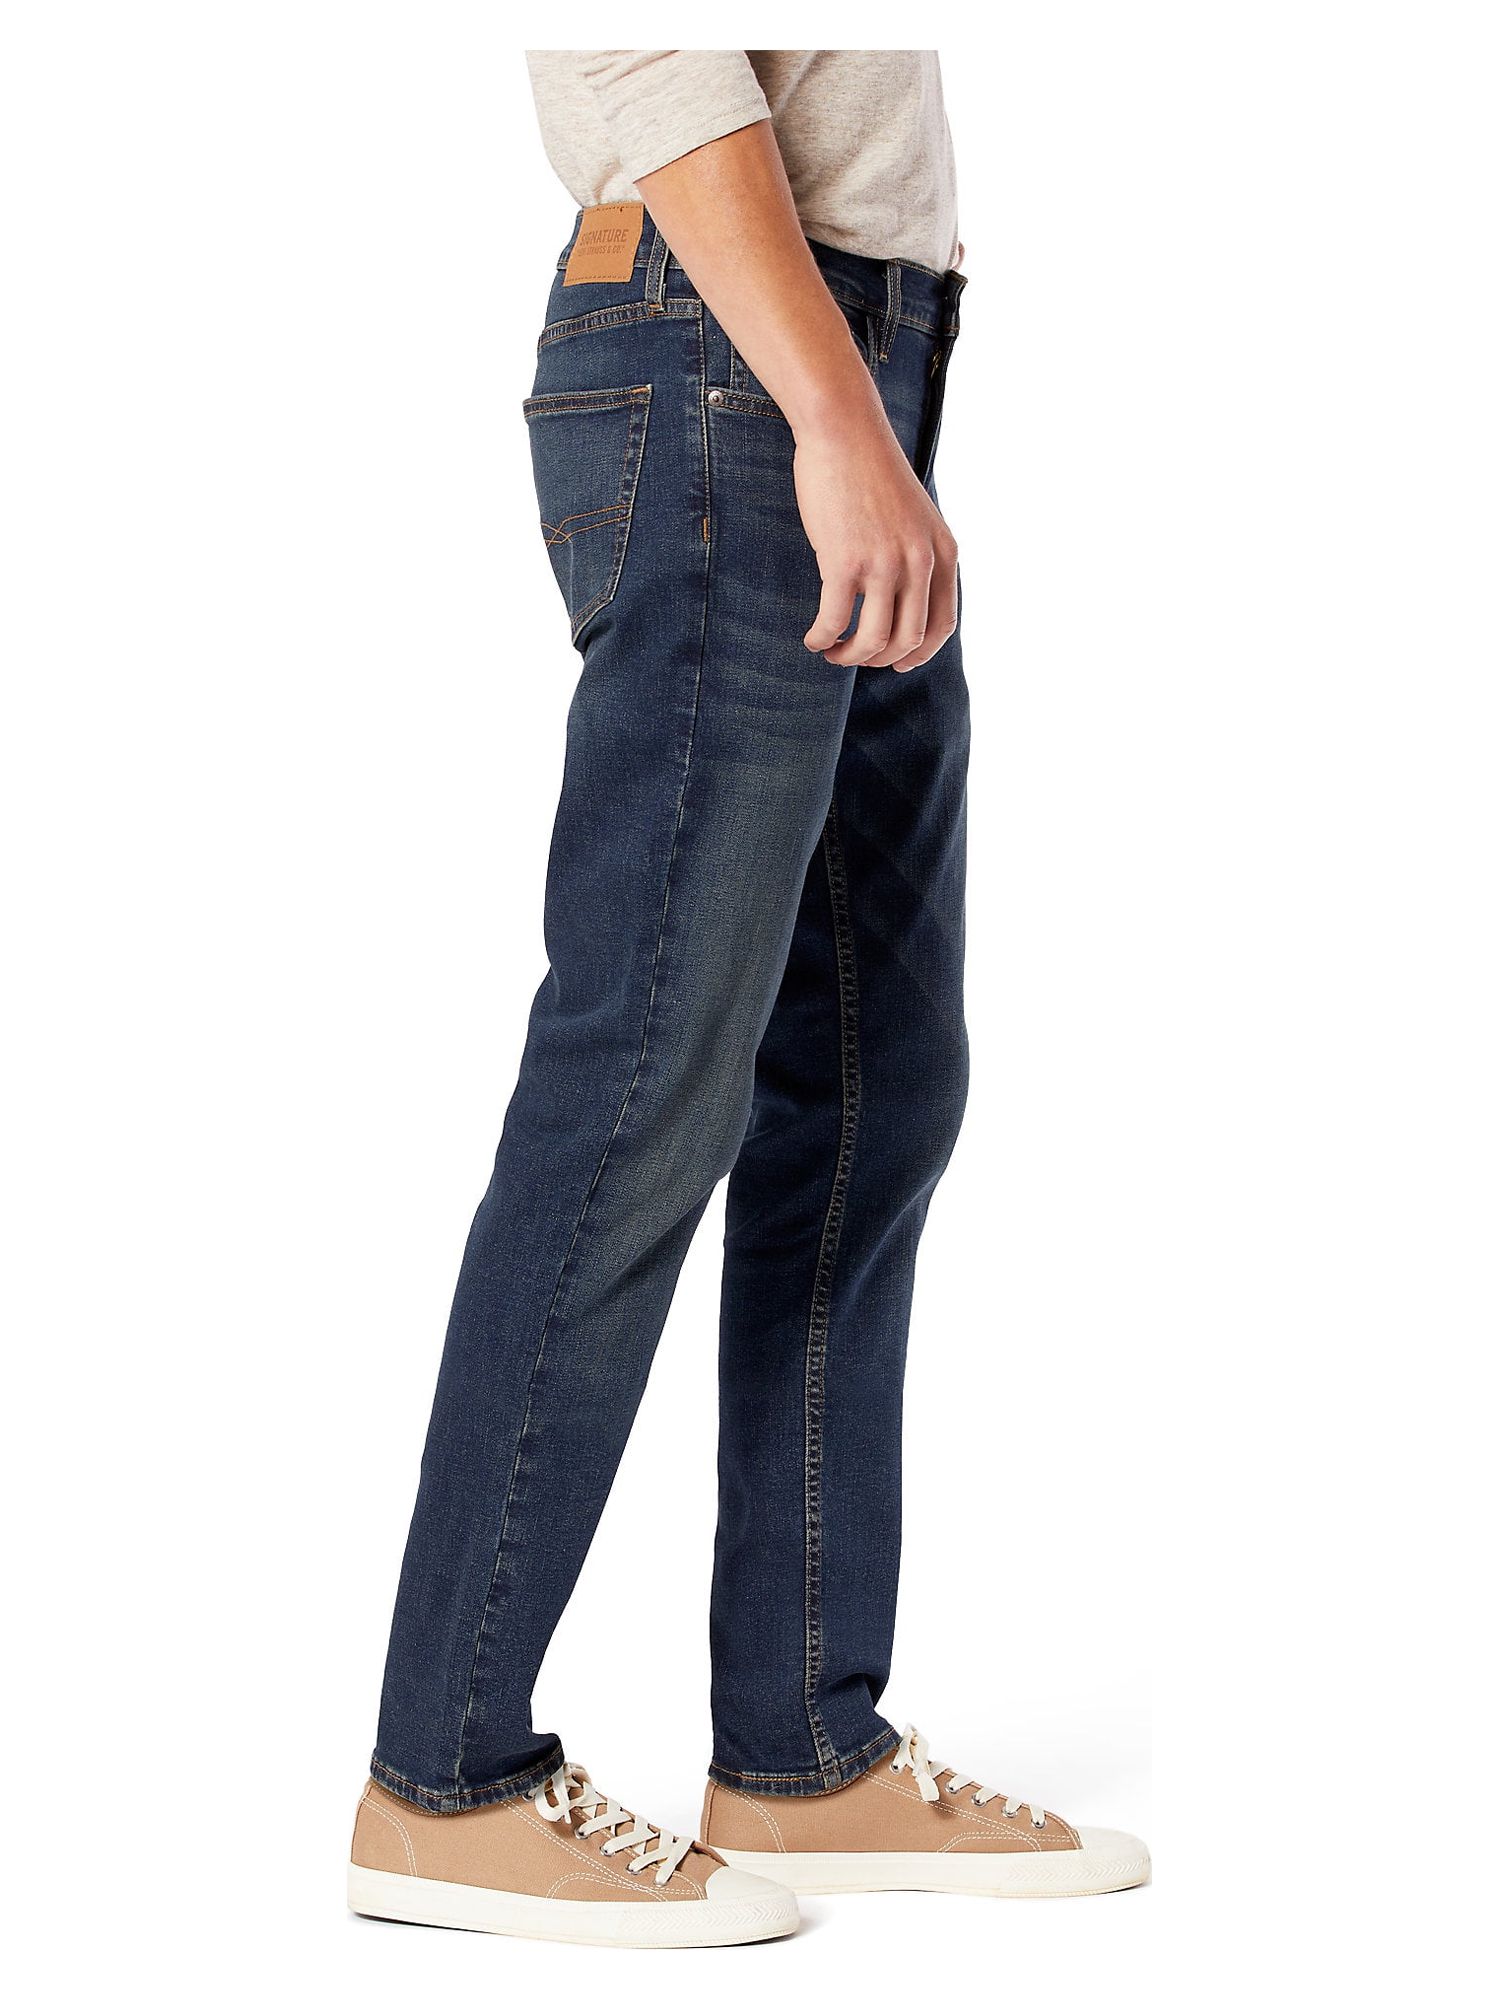 Signature by Levi Strauss & Co. Men's and Big Men's Slim Fit Jeans - image 5 of 5